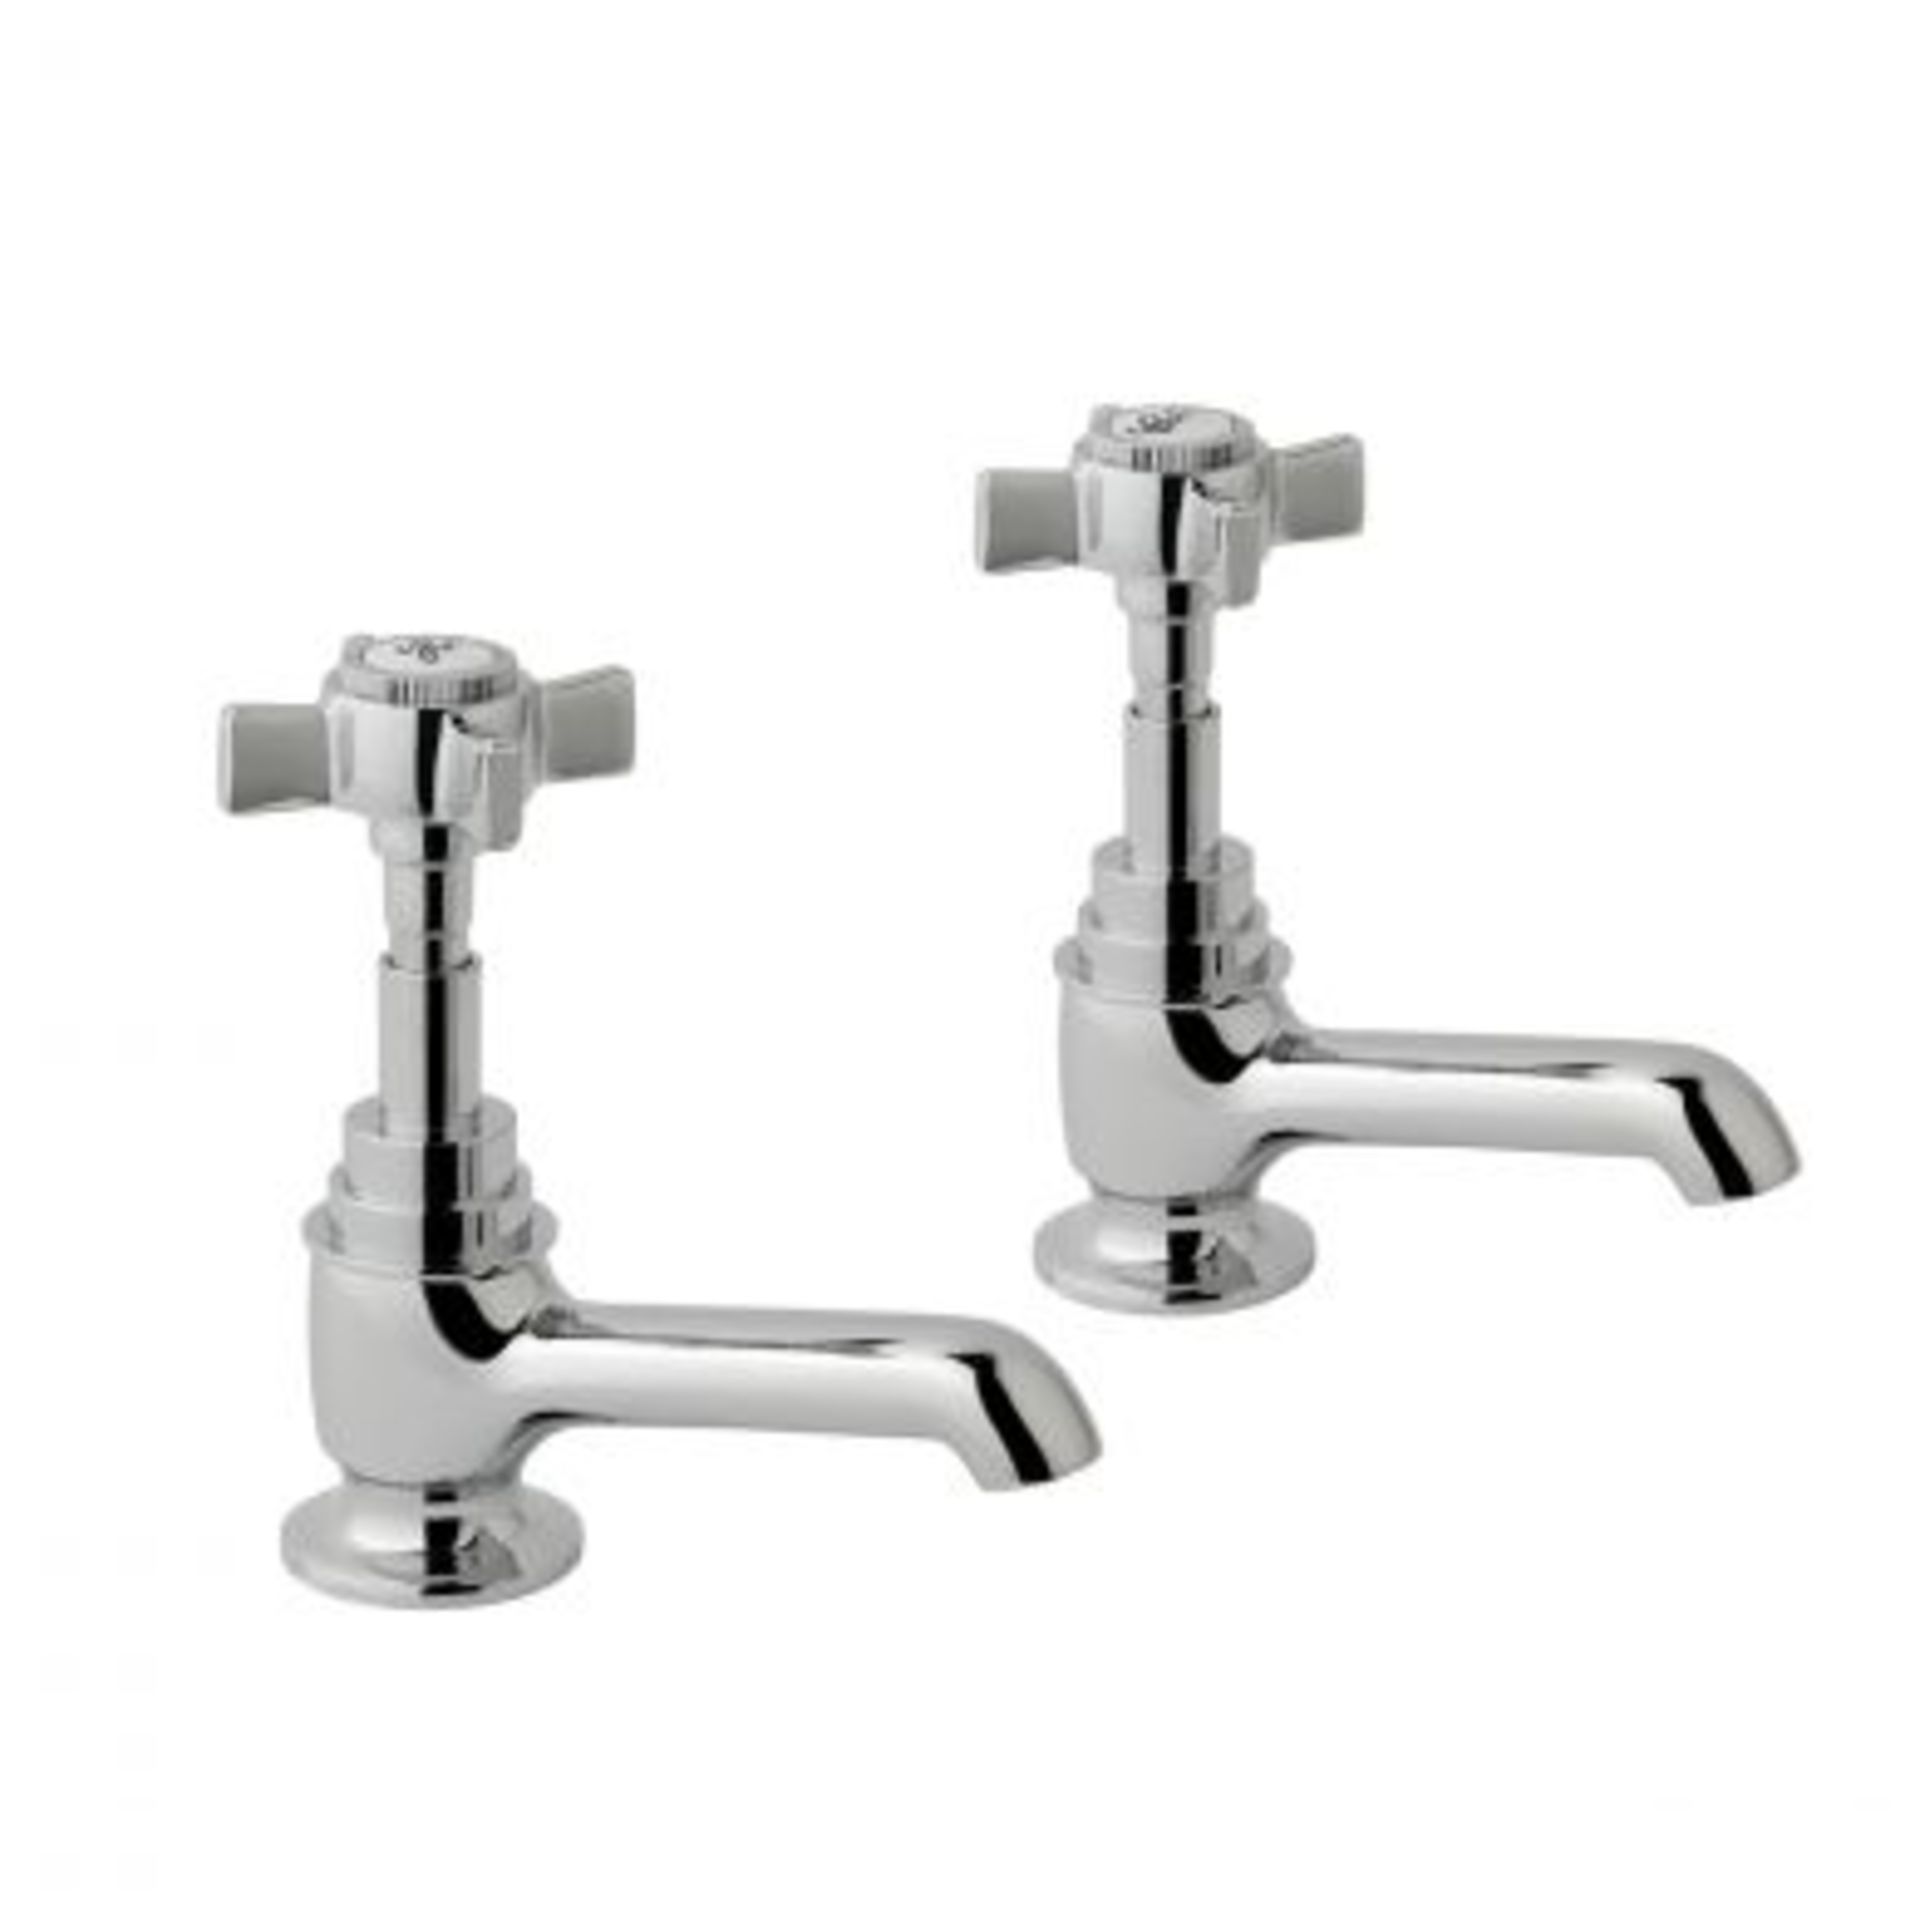 New (WG35) Bynea Bath Pillar Tap, Pack of 2. This traditional style chrome bath tap from the B...